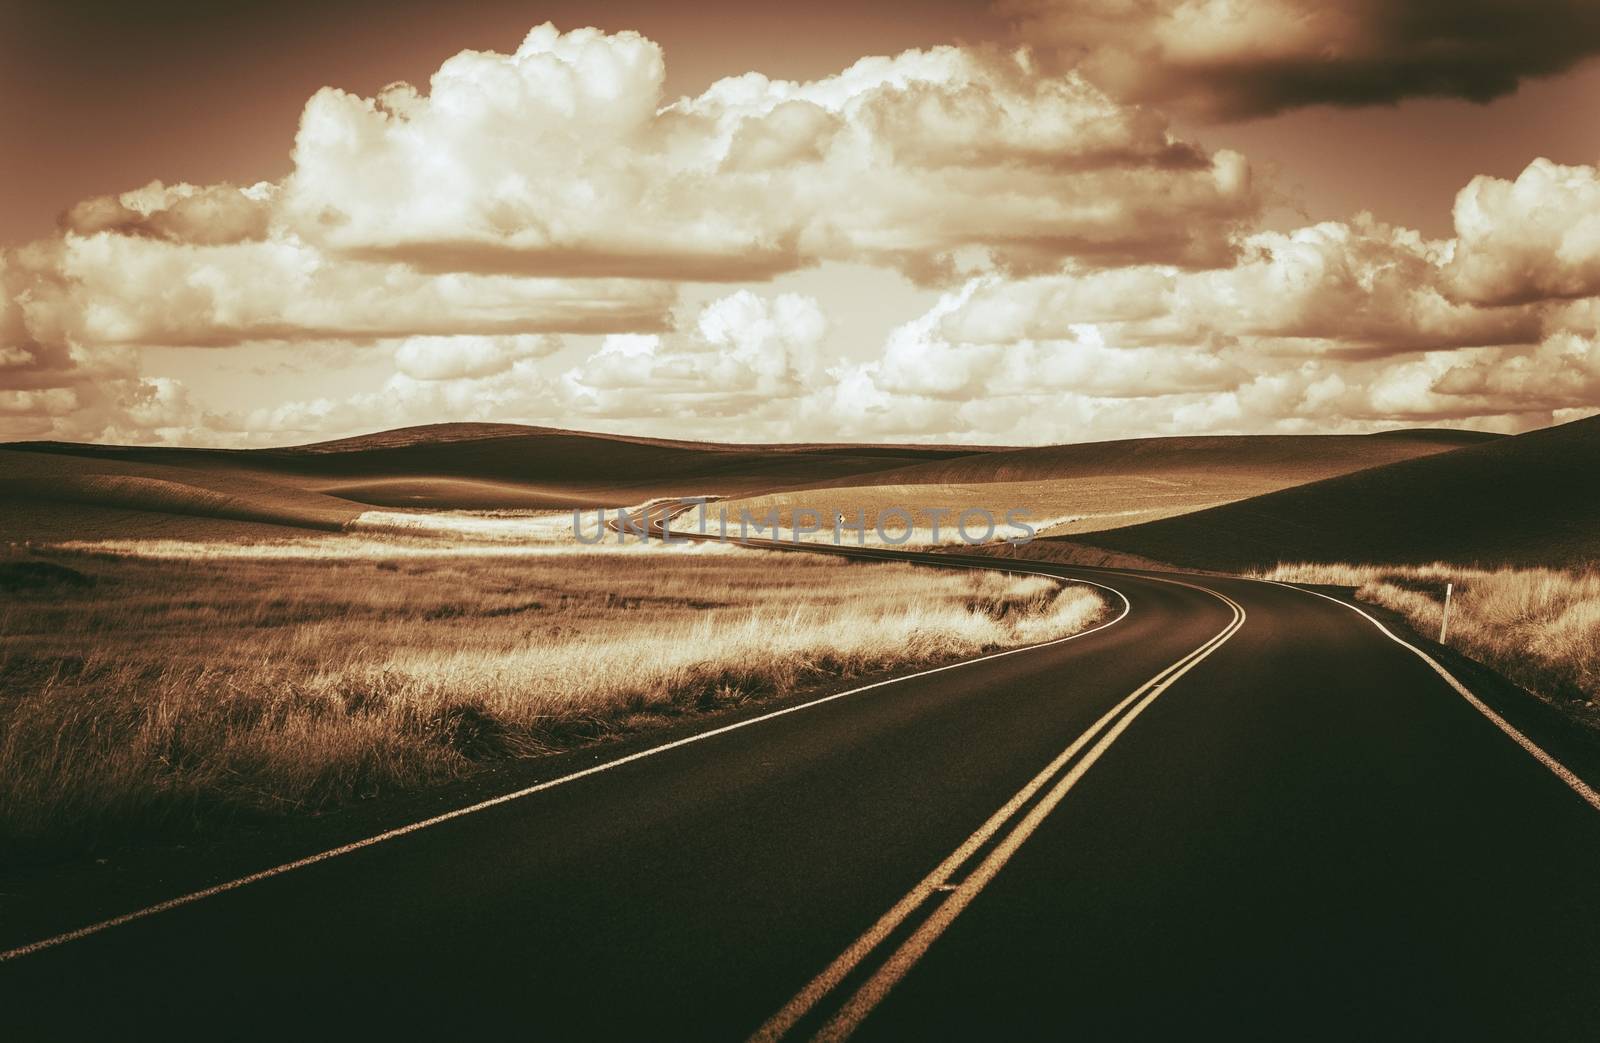 Scenic Winding Road and Butted Landscape in Dark Sepia Color Grading. Eastern Washington State, USA.